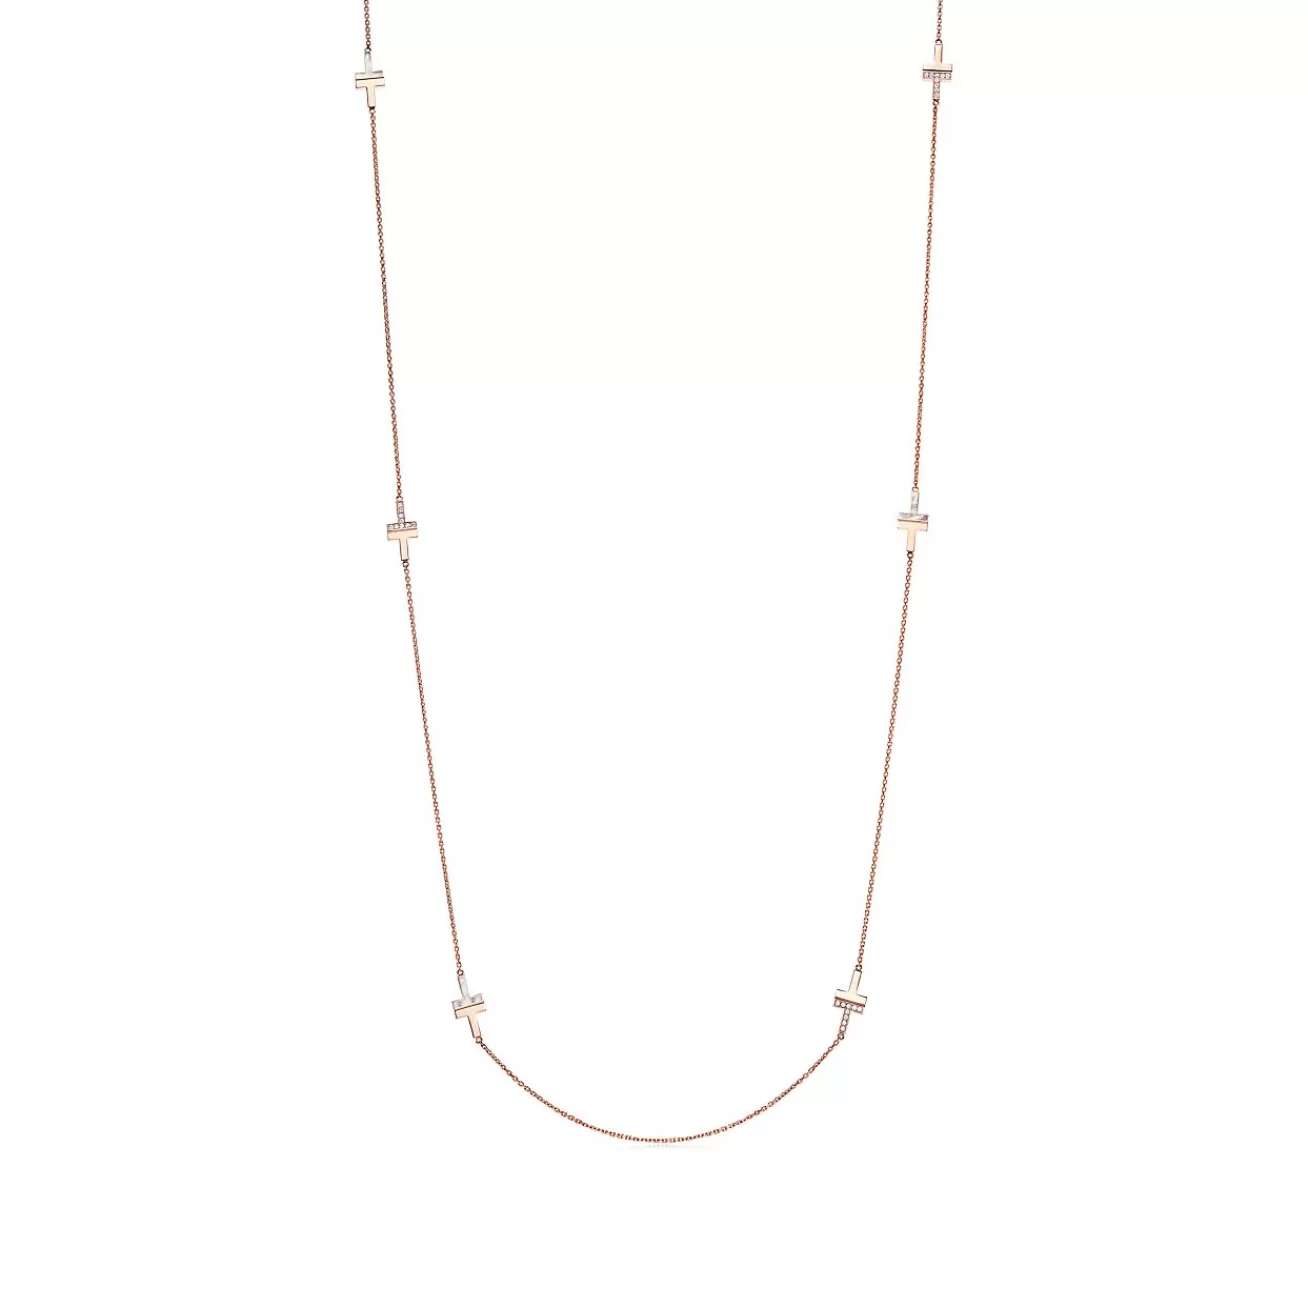 Tiffany & Co. Tiffany T diamond and mother-of-pearl station necklace in 18k rose gold. | ^ Necklaces & Pendants | Gifts for Her